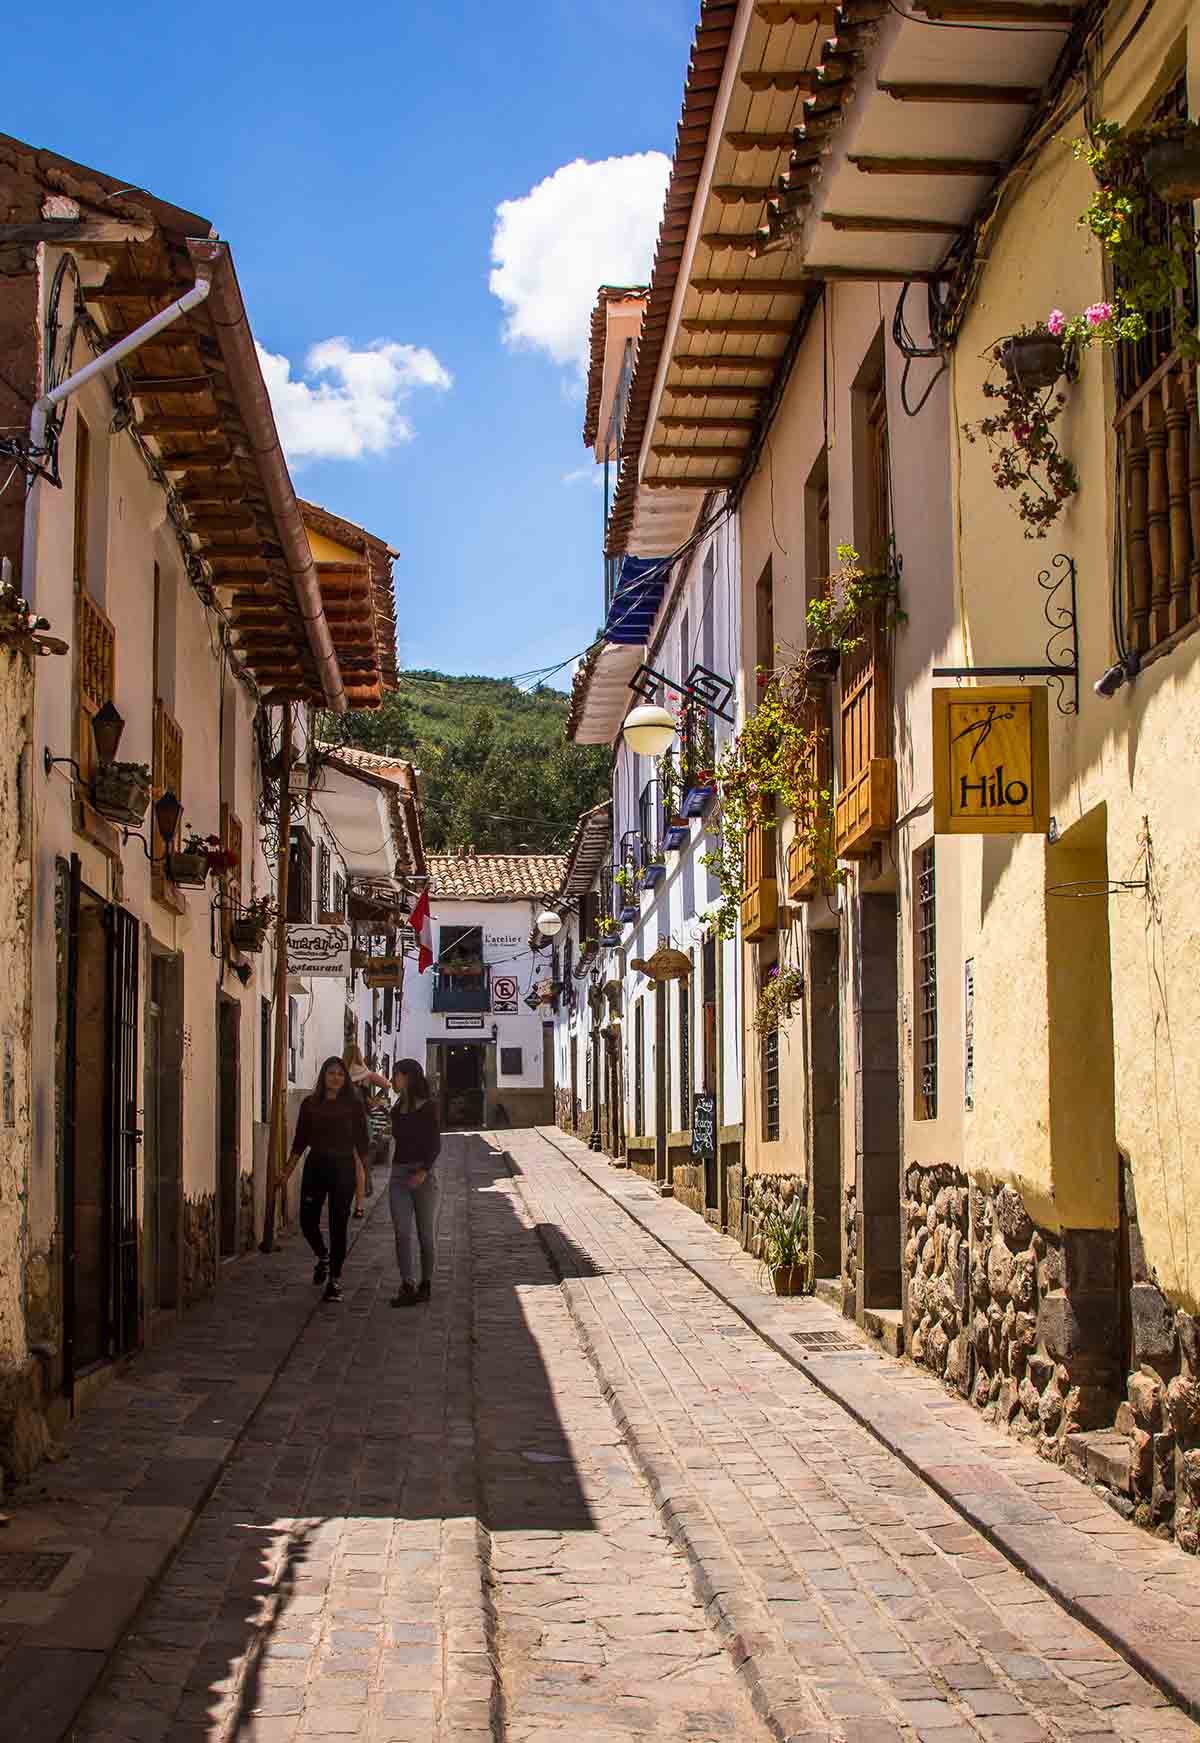 A brightly decorated street in the oldest neighborhood in Cusco, San Blas.